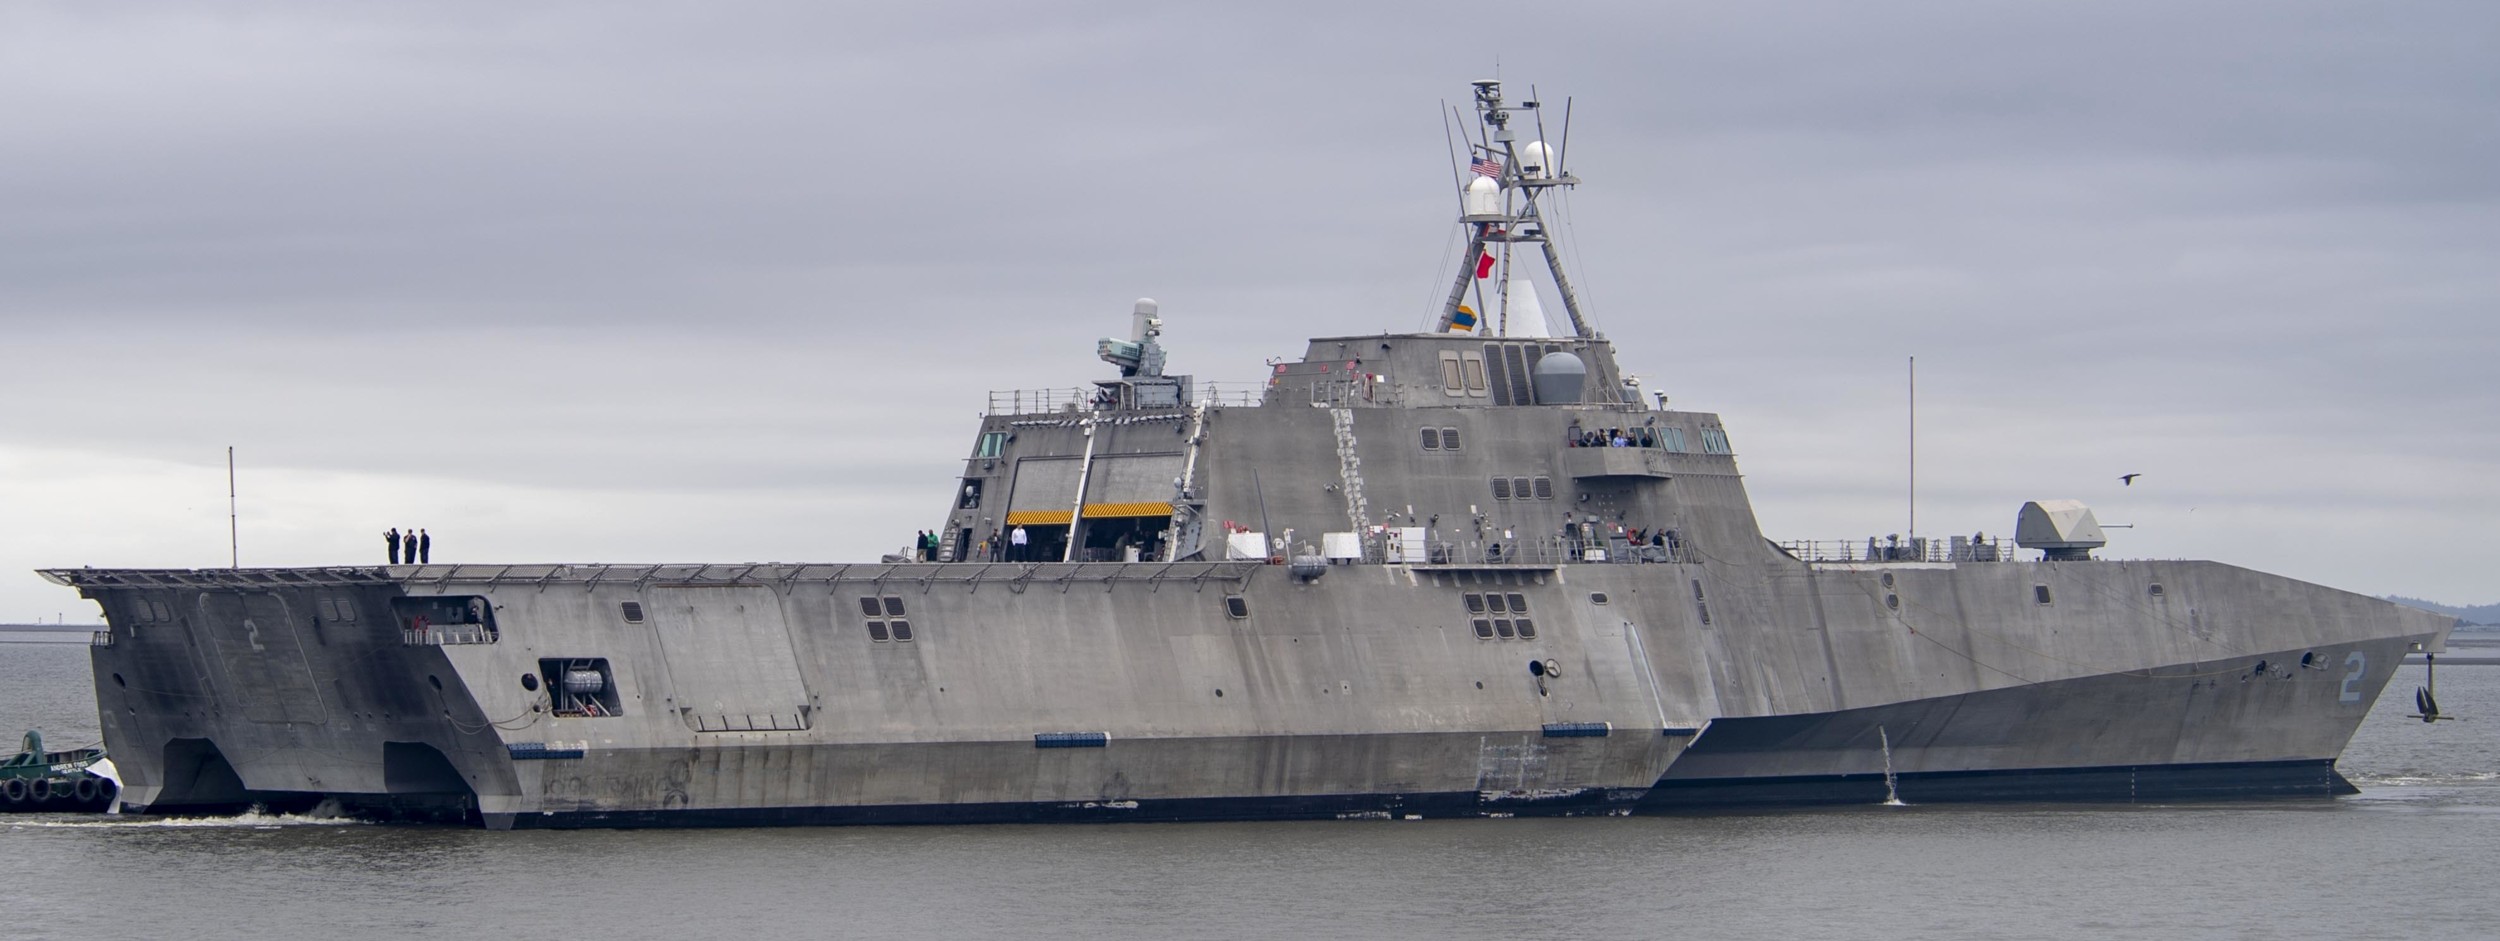 lcs-2 uss independence littoral combat ship us navy class 09 rose festival portland oregon